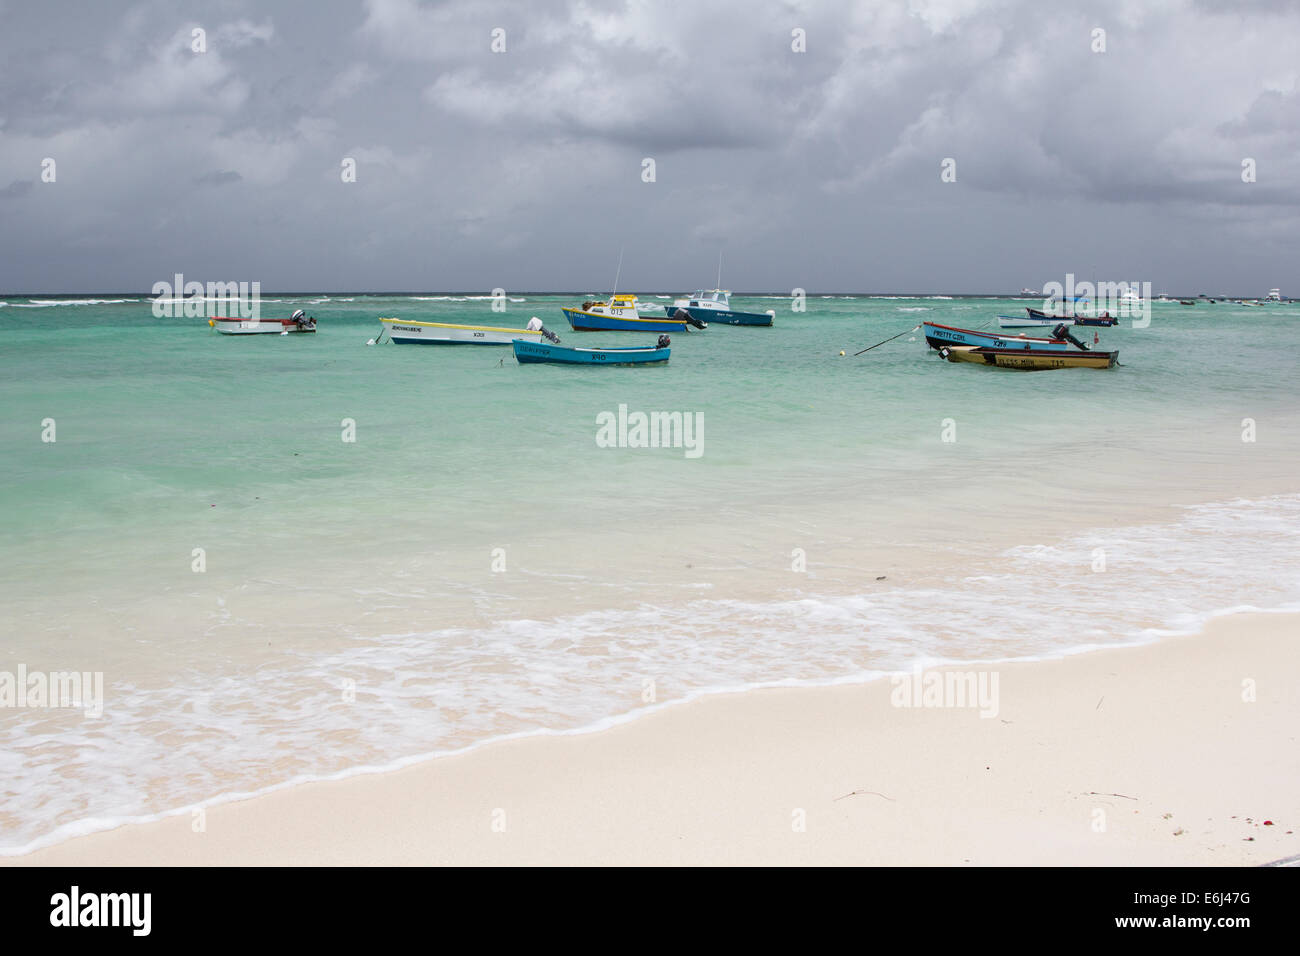 Beach view at St Lawrence Gap Barbados with cloudy sky and small boats in the sea Stock Photo